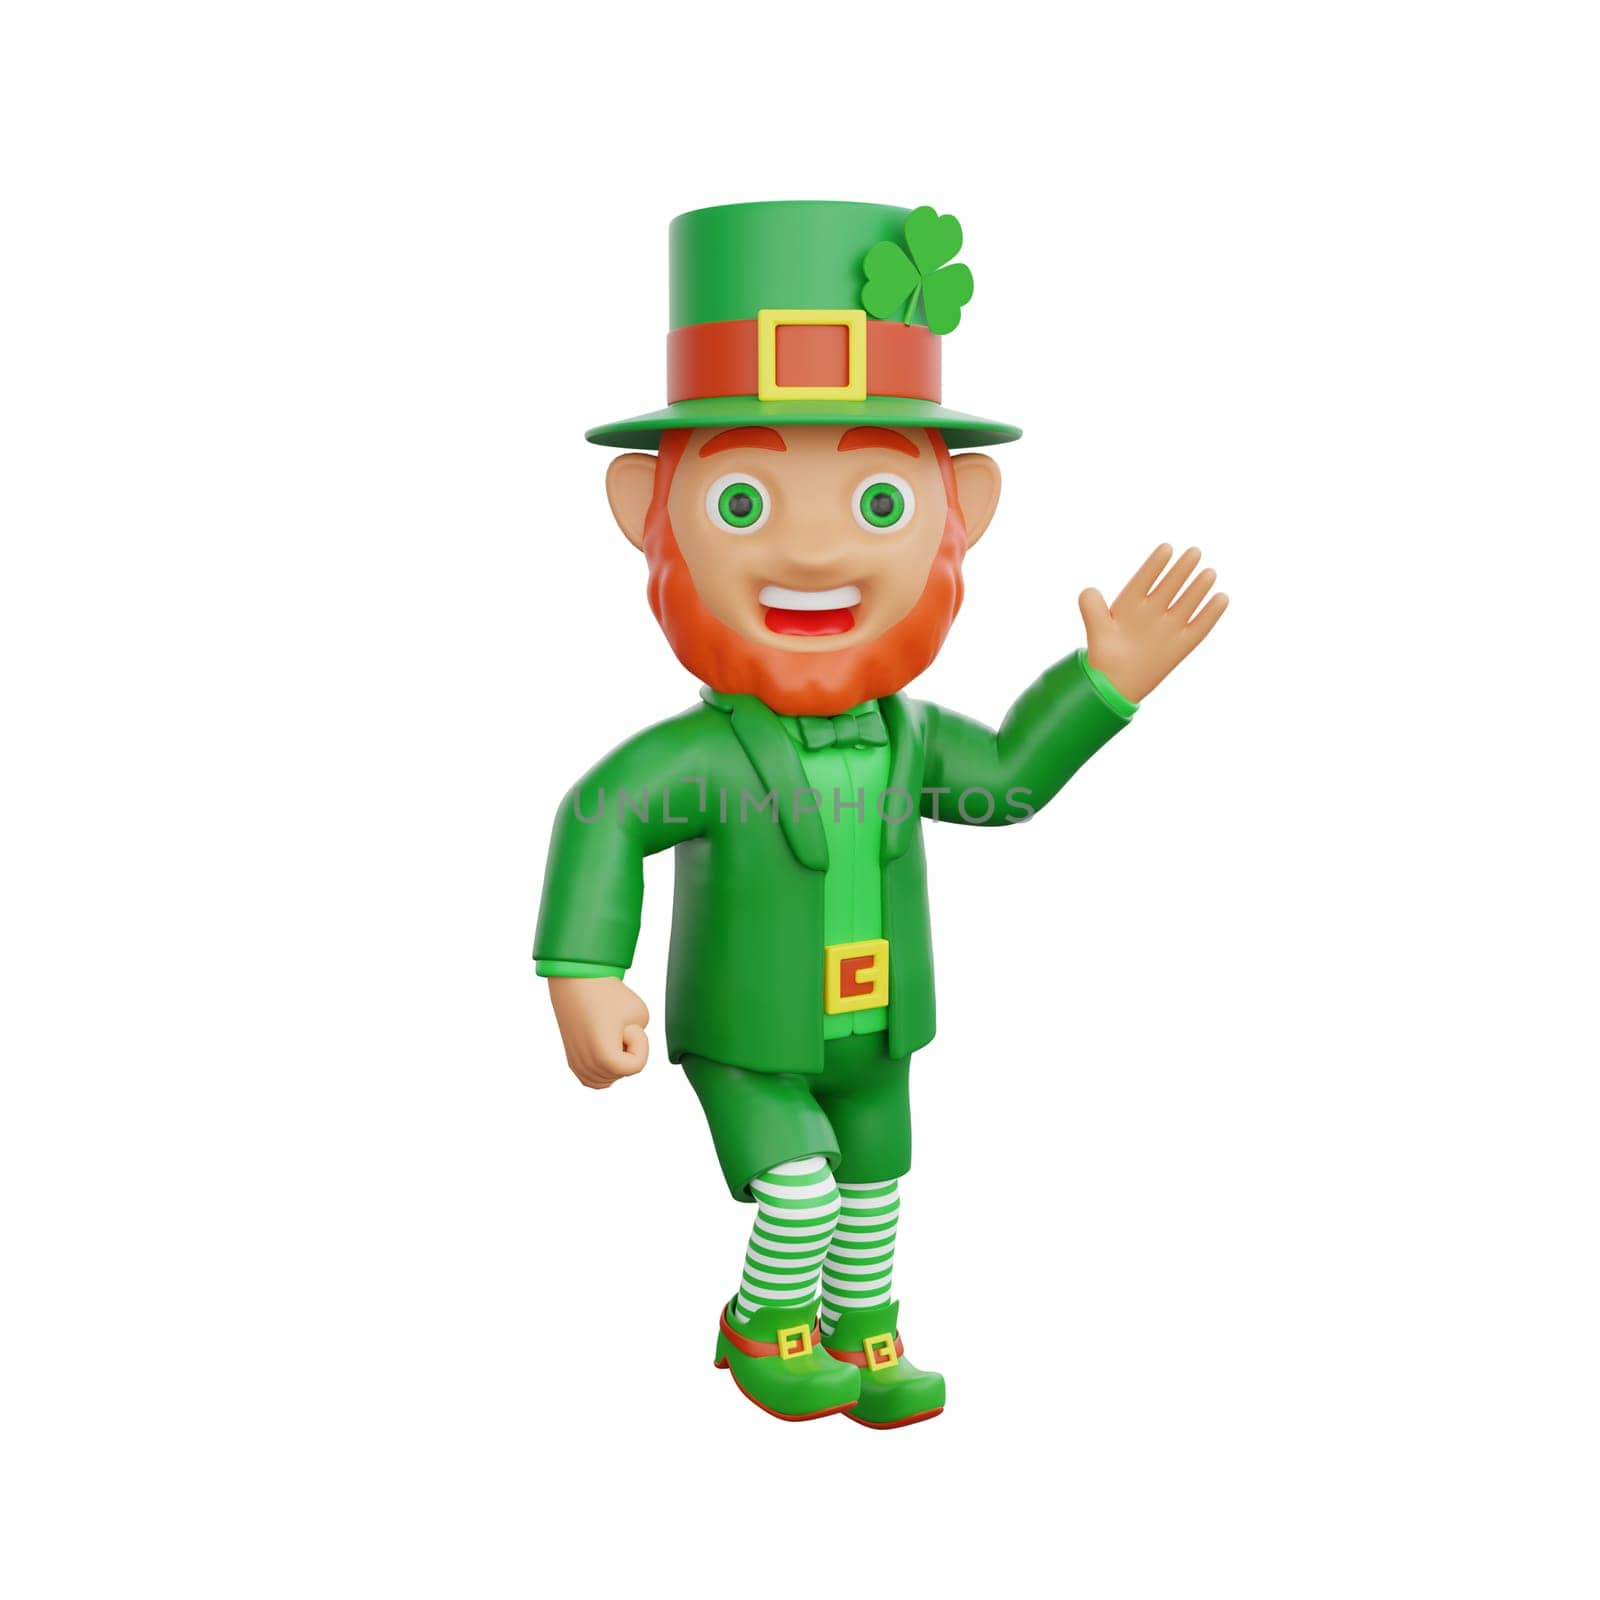 3D illustration of a joyful leprechaun, waves hello while dancing, perfect for St. Patrick's Day themed projects